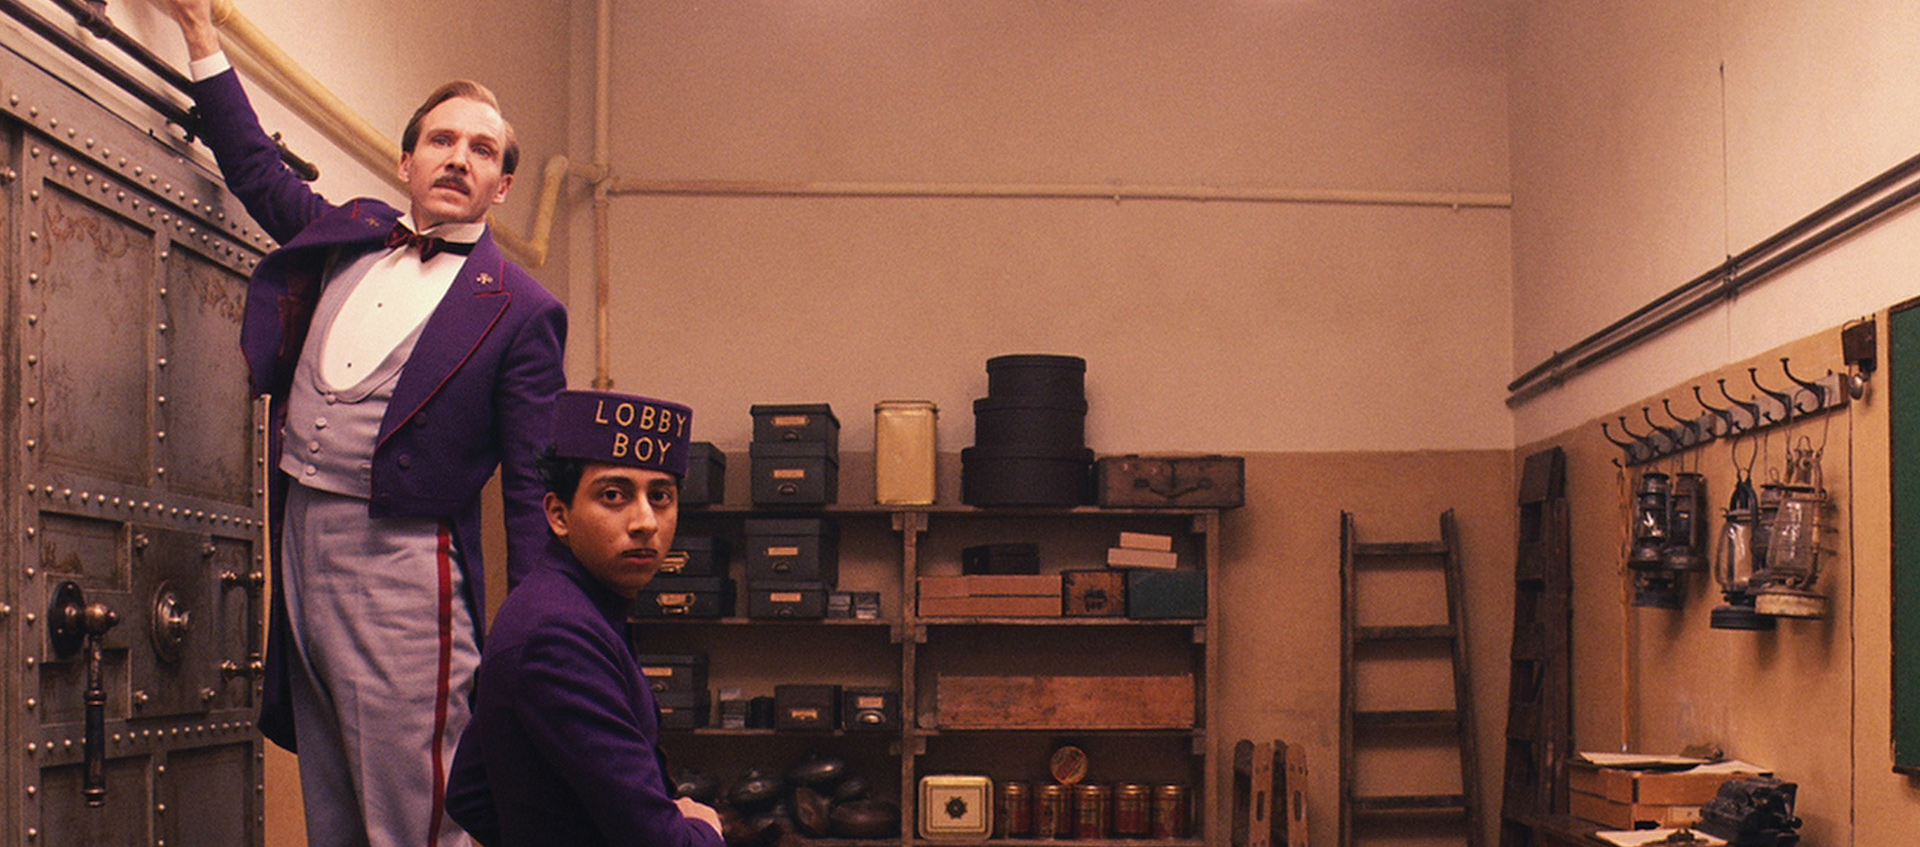 Unwrapping the layers of “The Grand Budapest Hotel”